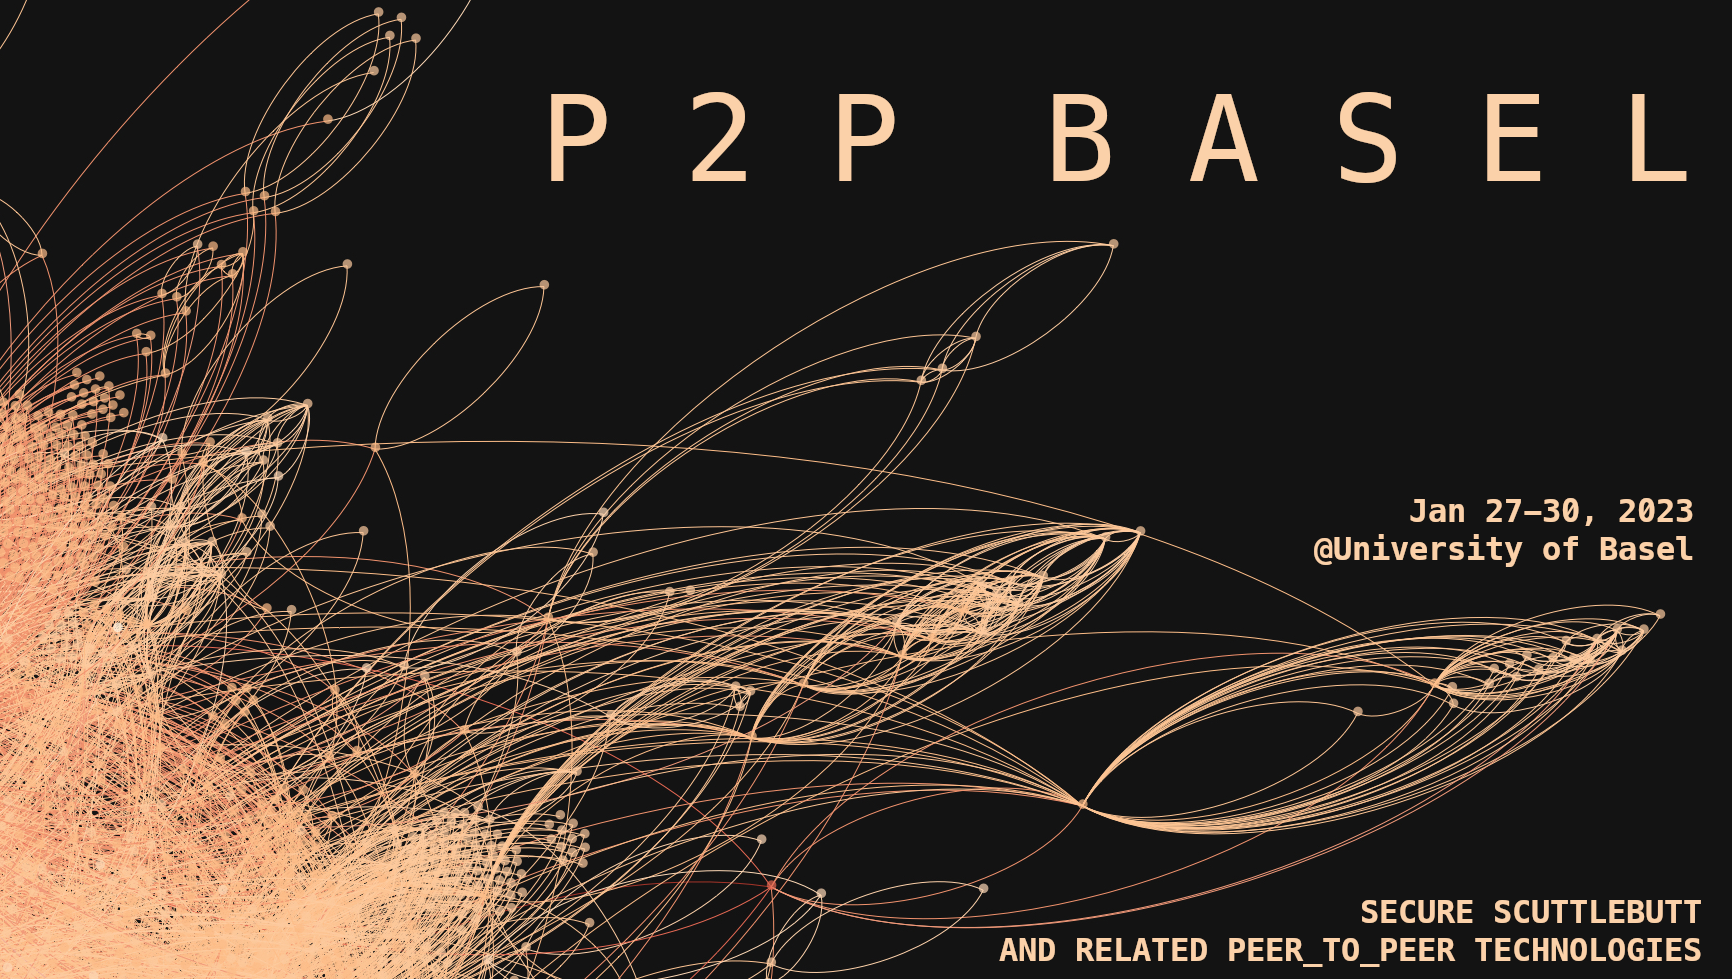 picture of a banner or logo from P2P Basel 2023